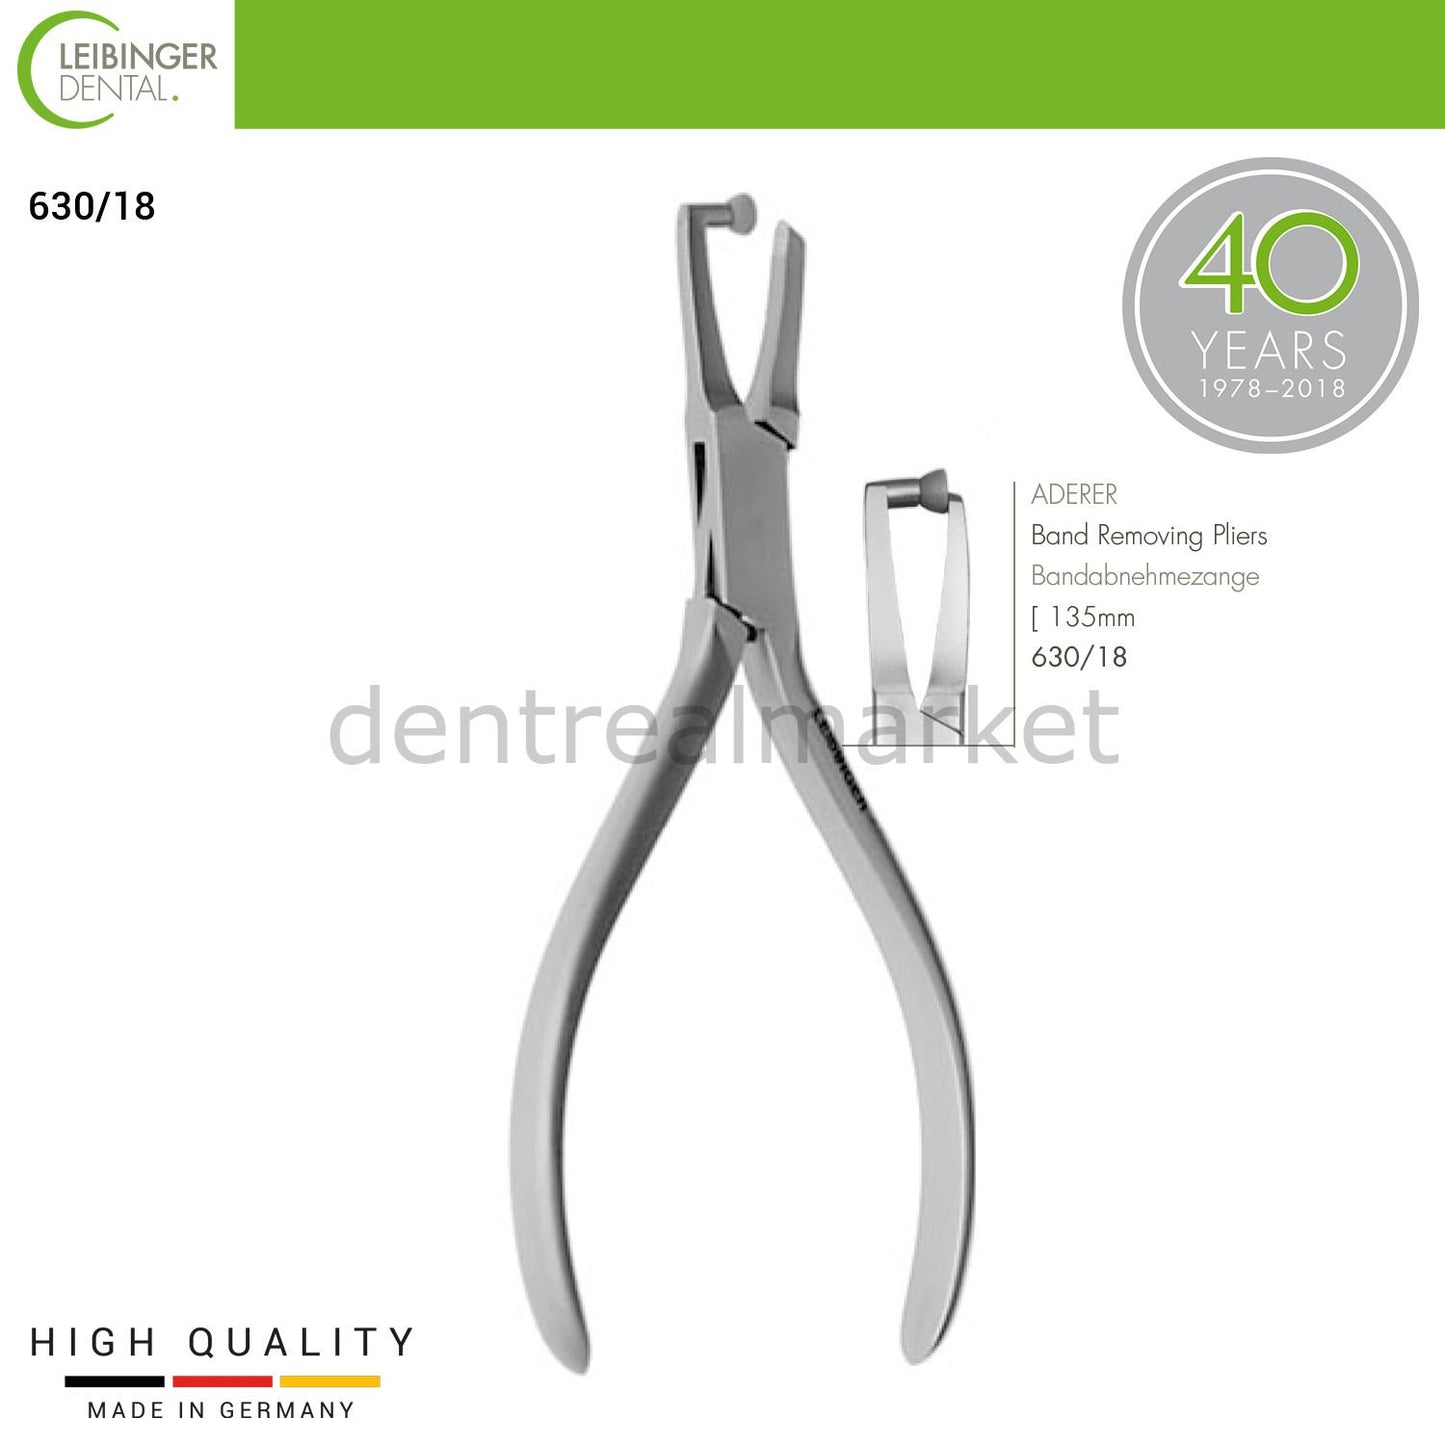 Aderer Band Removing Pliers - Tape Removal Pliers - 135 mm